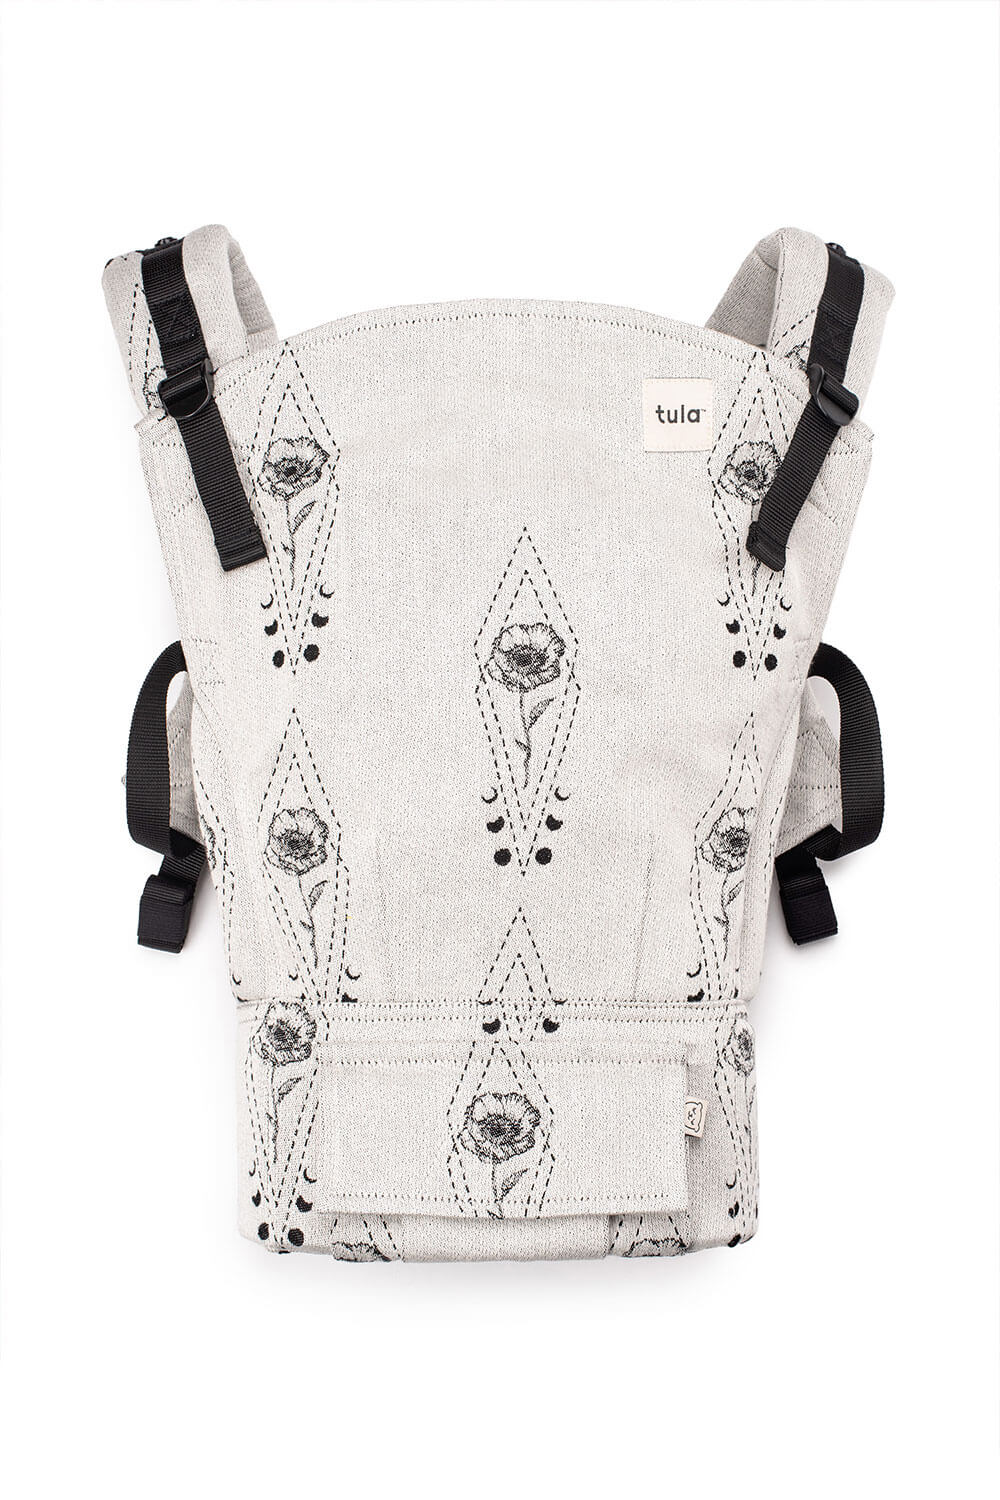 L'Universe - Signature Woven Standard Baby Carrier